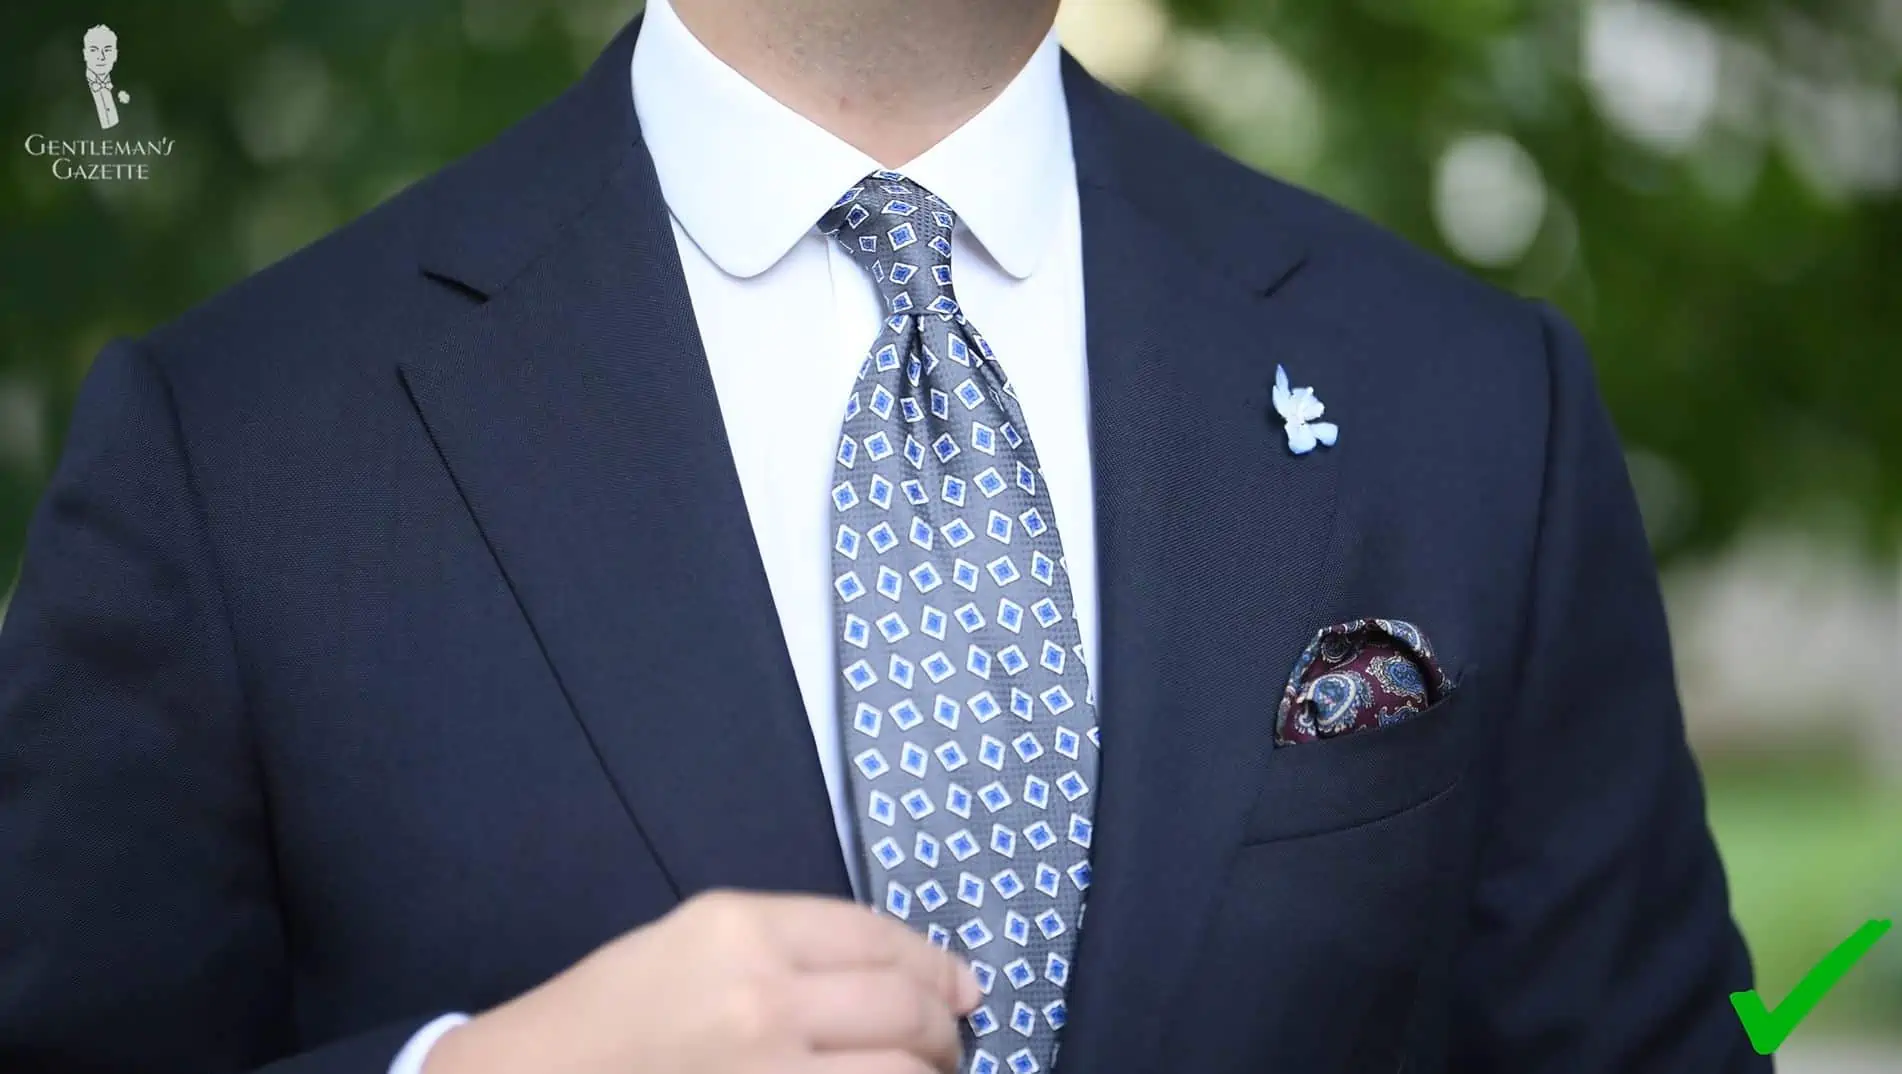 A blue suit worn with a battleship Gray Jacquard Woven Tie with Printed Light Blue and White Diamonds from Fort Belvedere